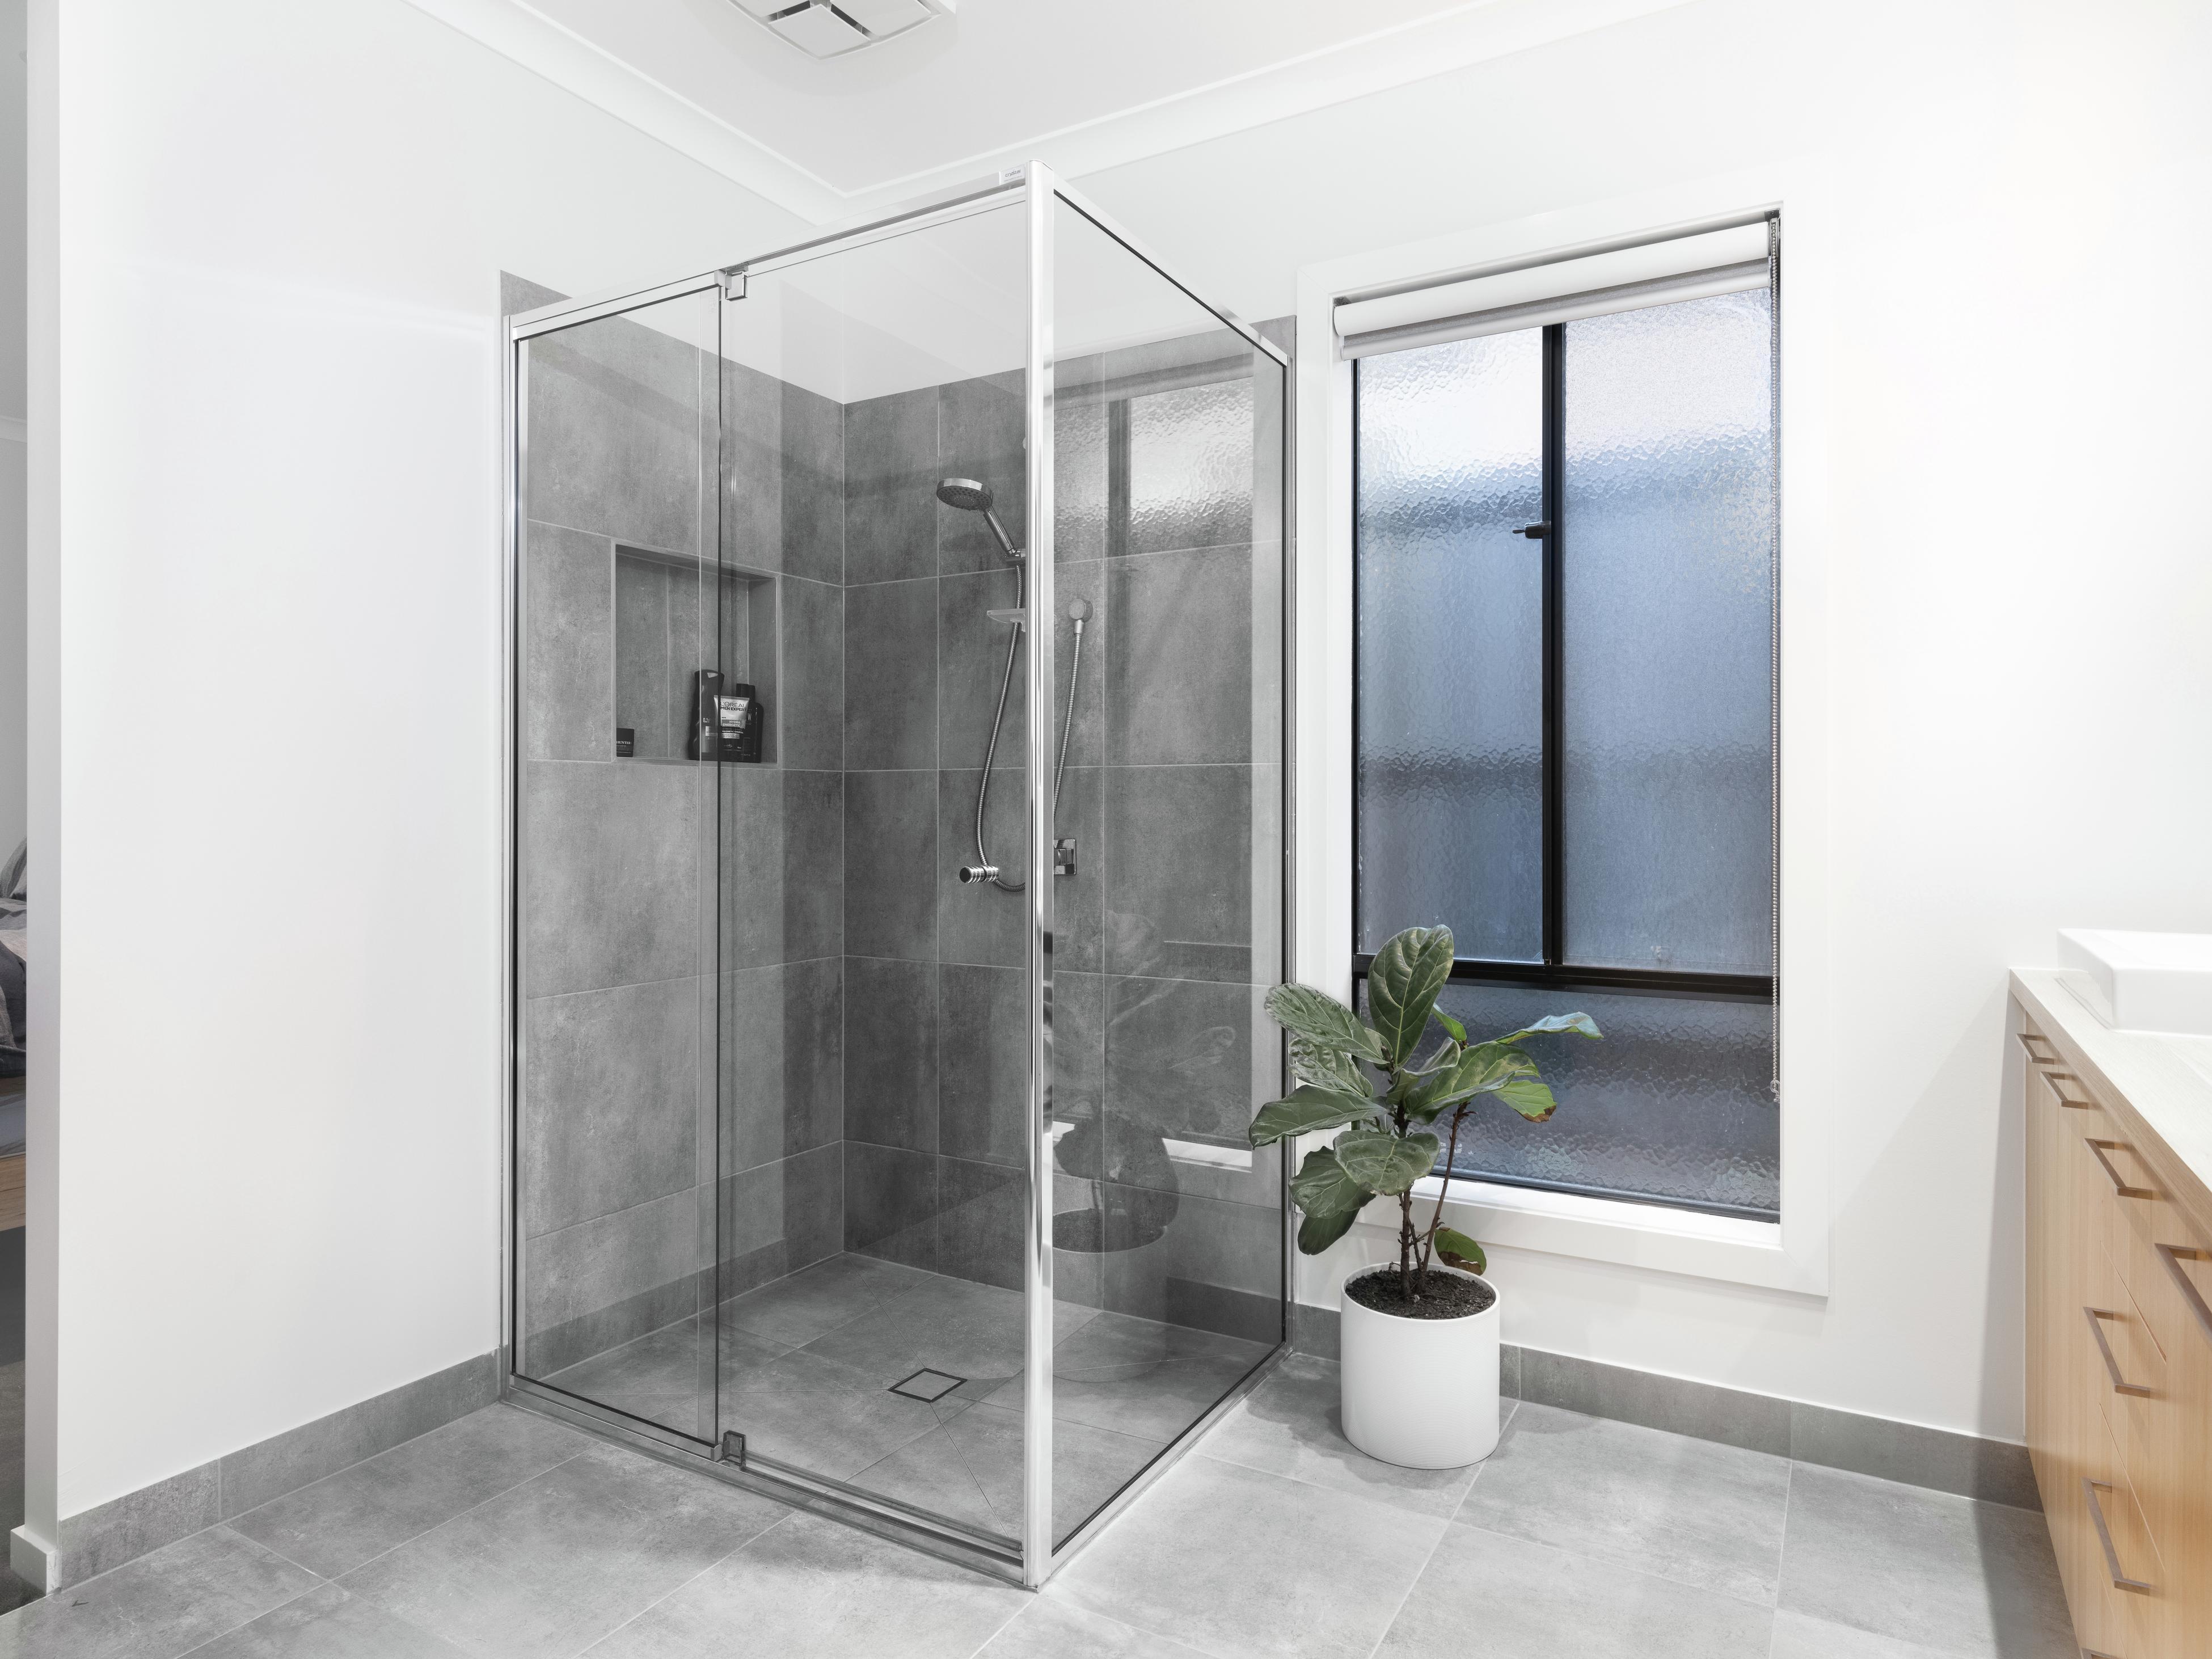 New shower door, what would you apply to protect it? RainX? : r/CleaningTips